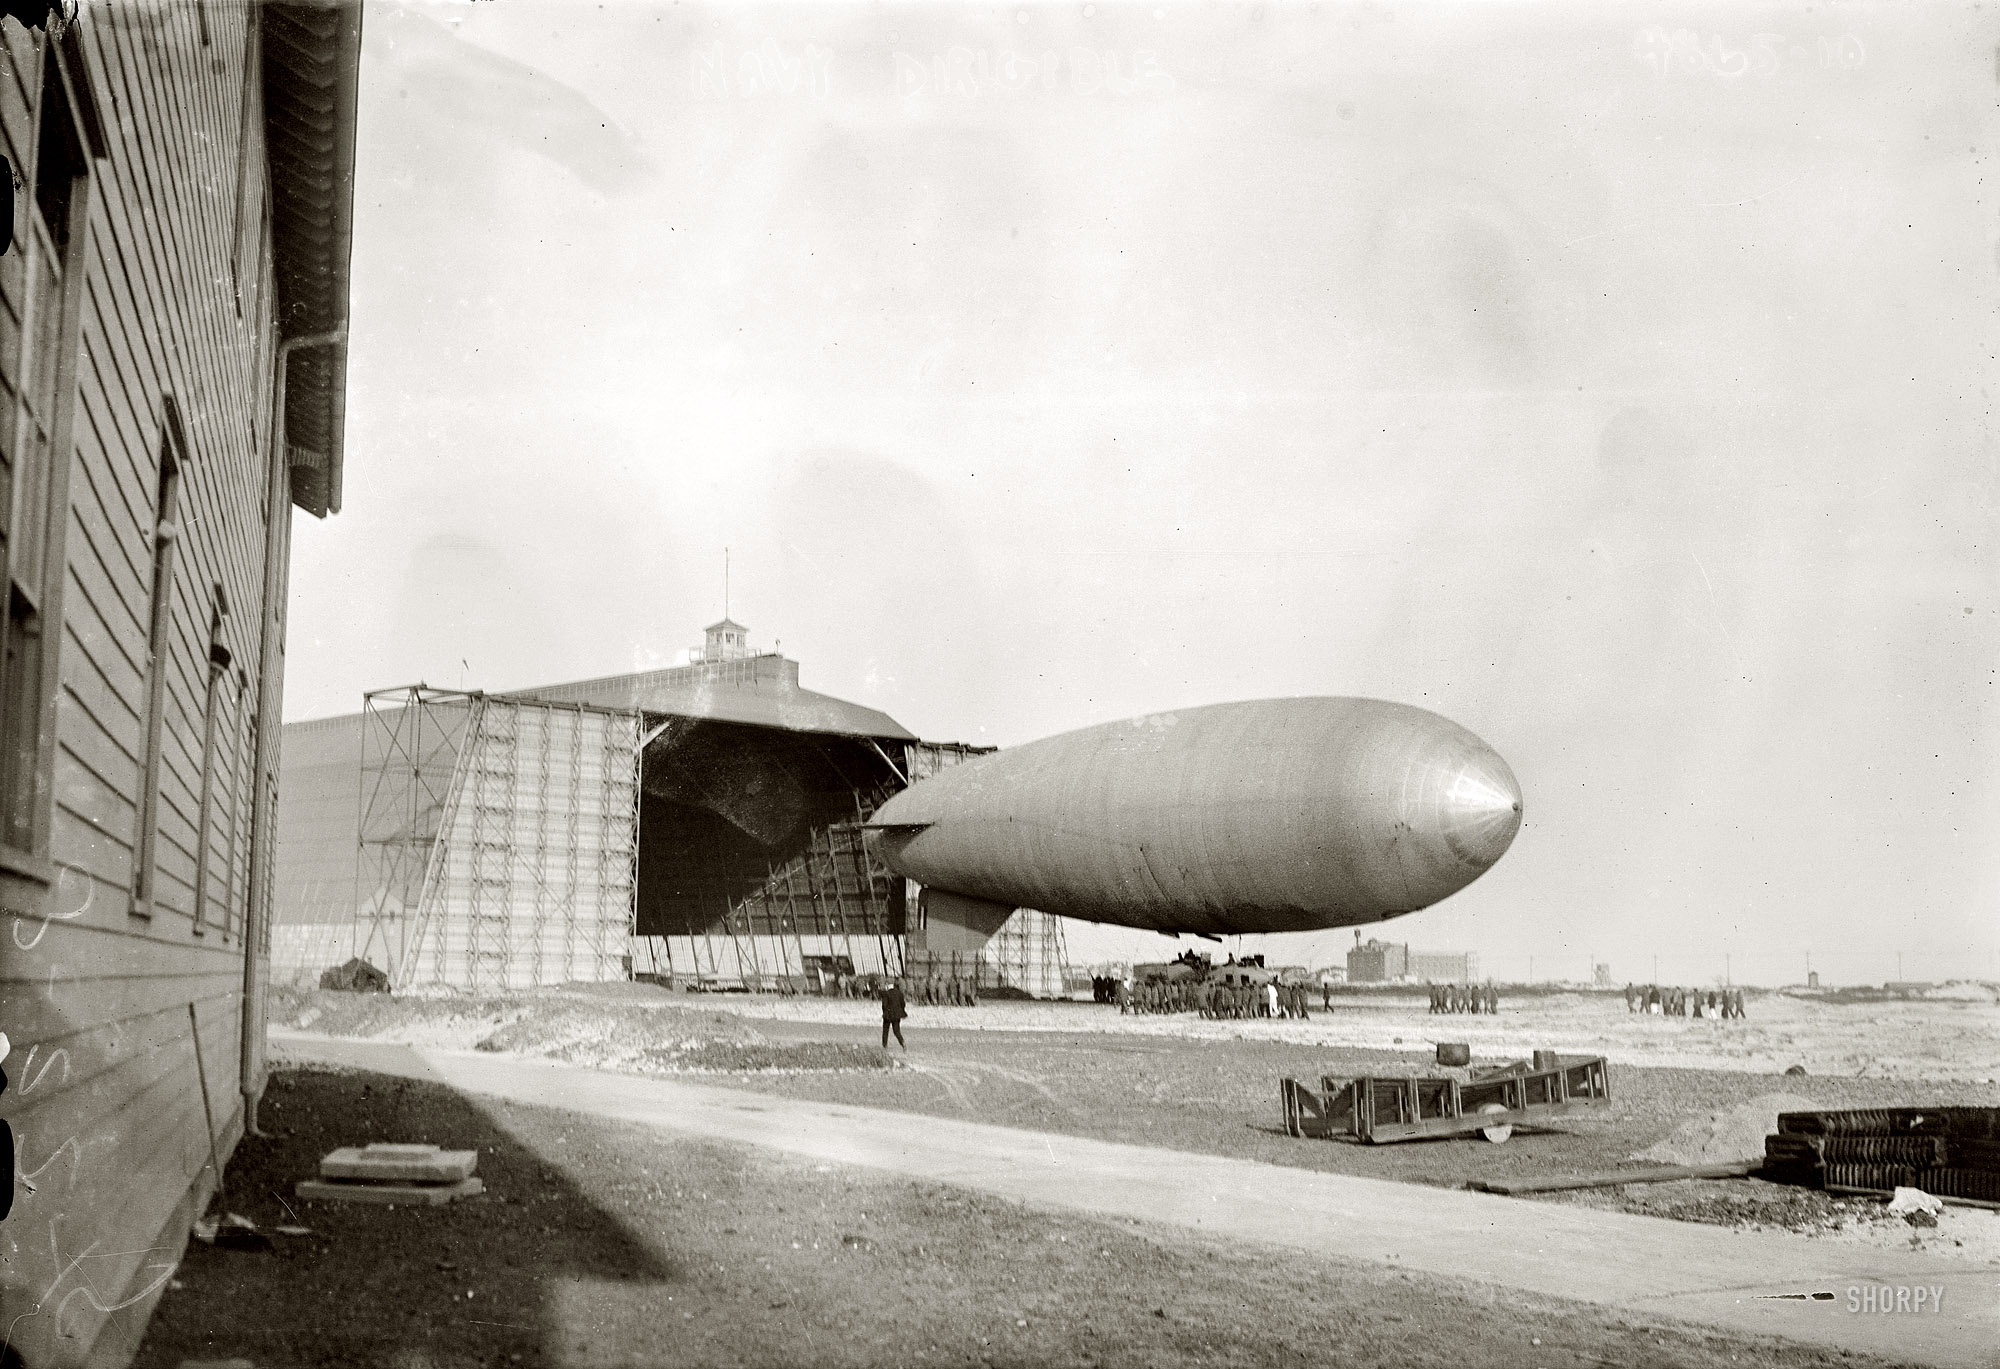 New York, March 22, 1915. "Navy dirigible, Long Island." 5x7 glass negative, George Grantham Bain Collection. View full size.